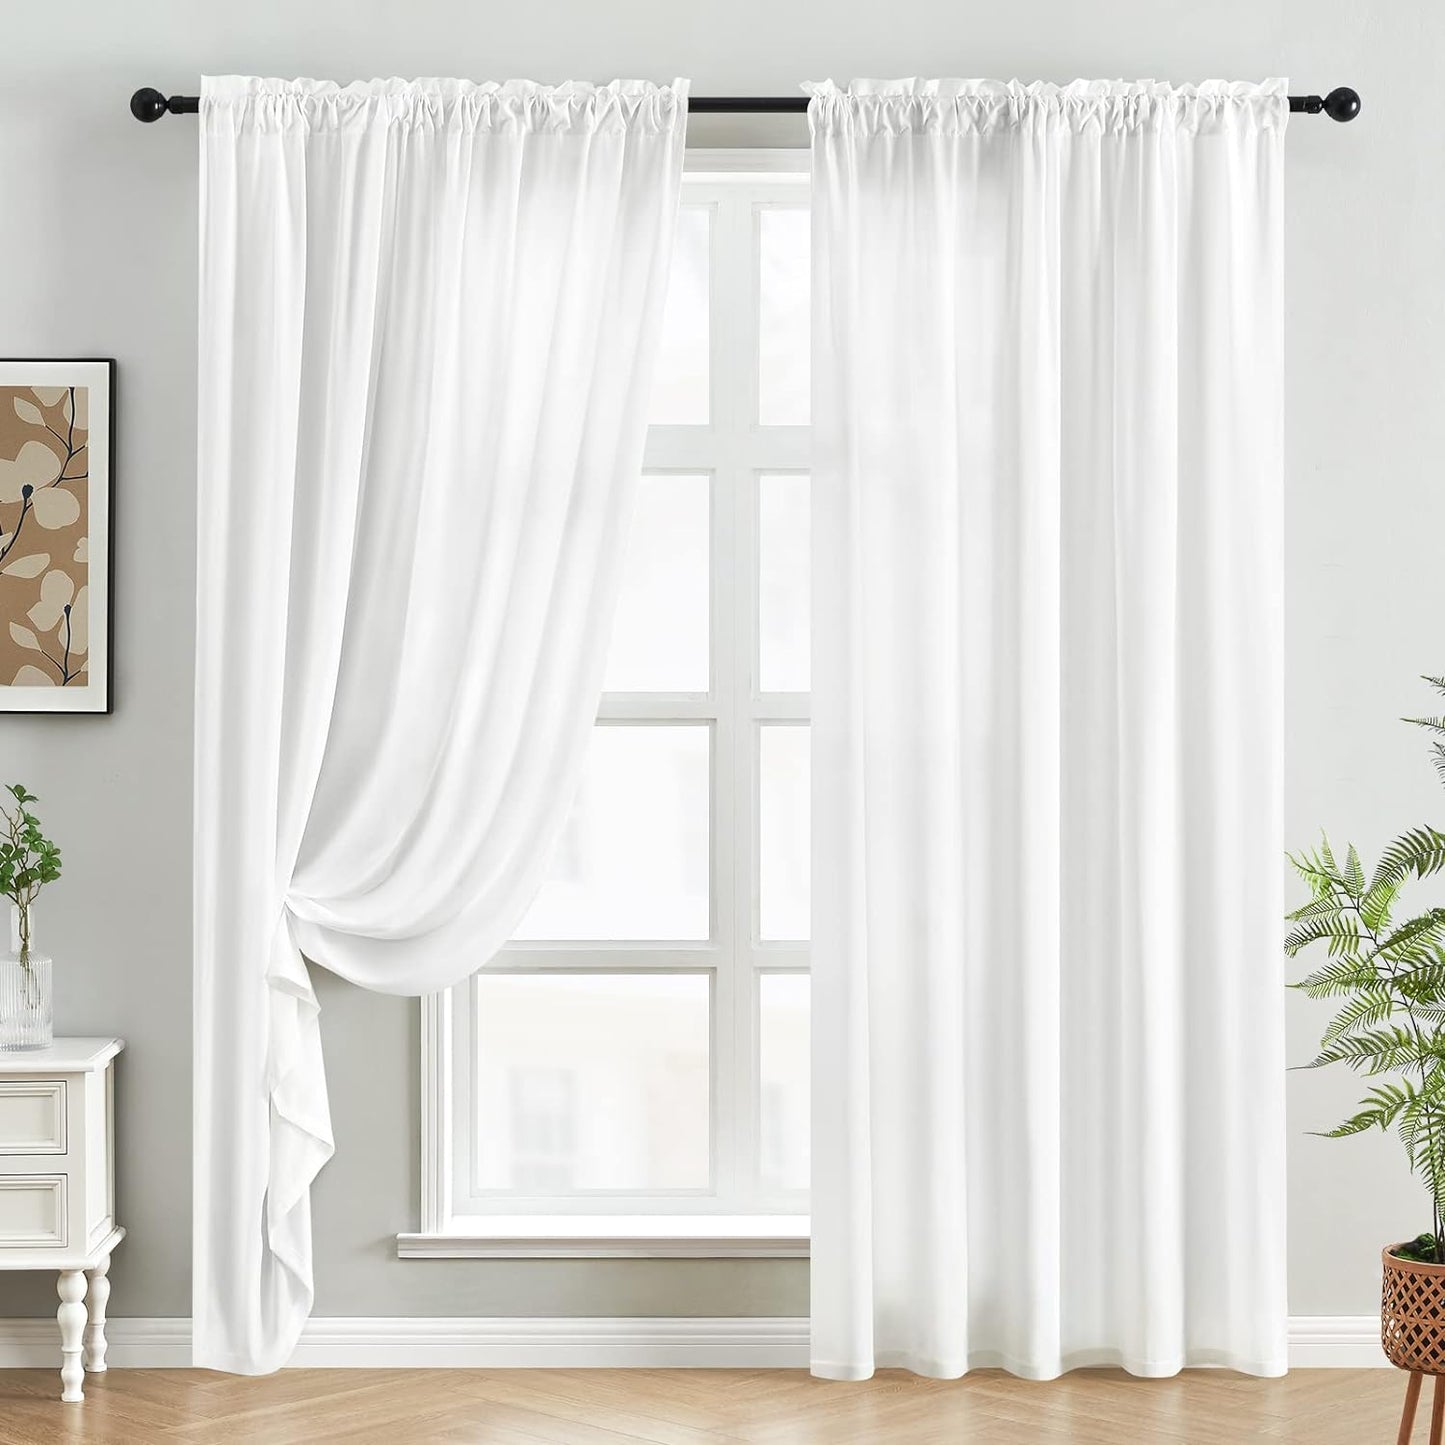 HOMEIDEAS Non-See-Through White Privacy Sheer Curtains 52 X 84 Inches Long 2 Panels Semi Sheer Curtains Light Filtering Window Curtains Drapes for Bedroom Living Room  HOMEIDEAS   